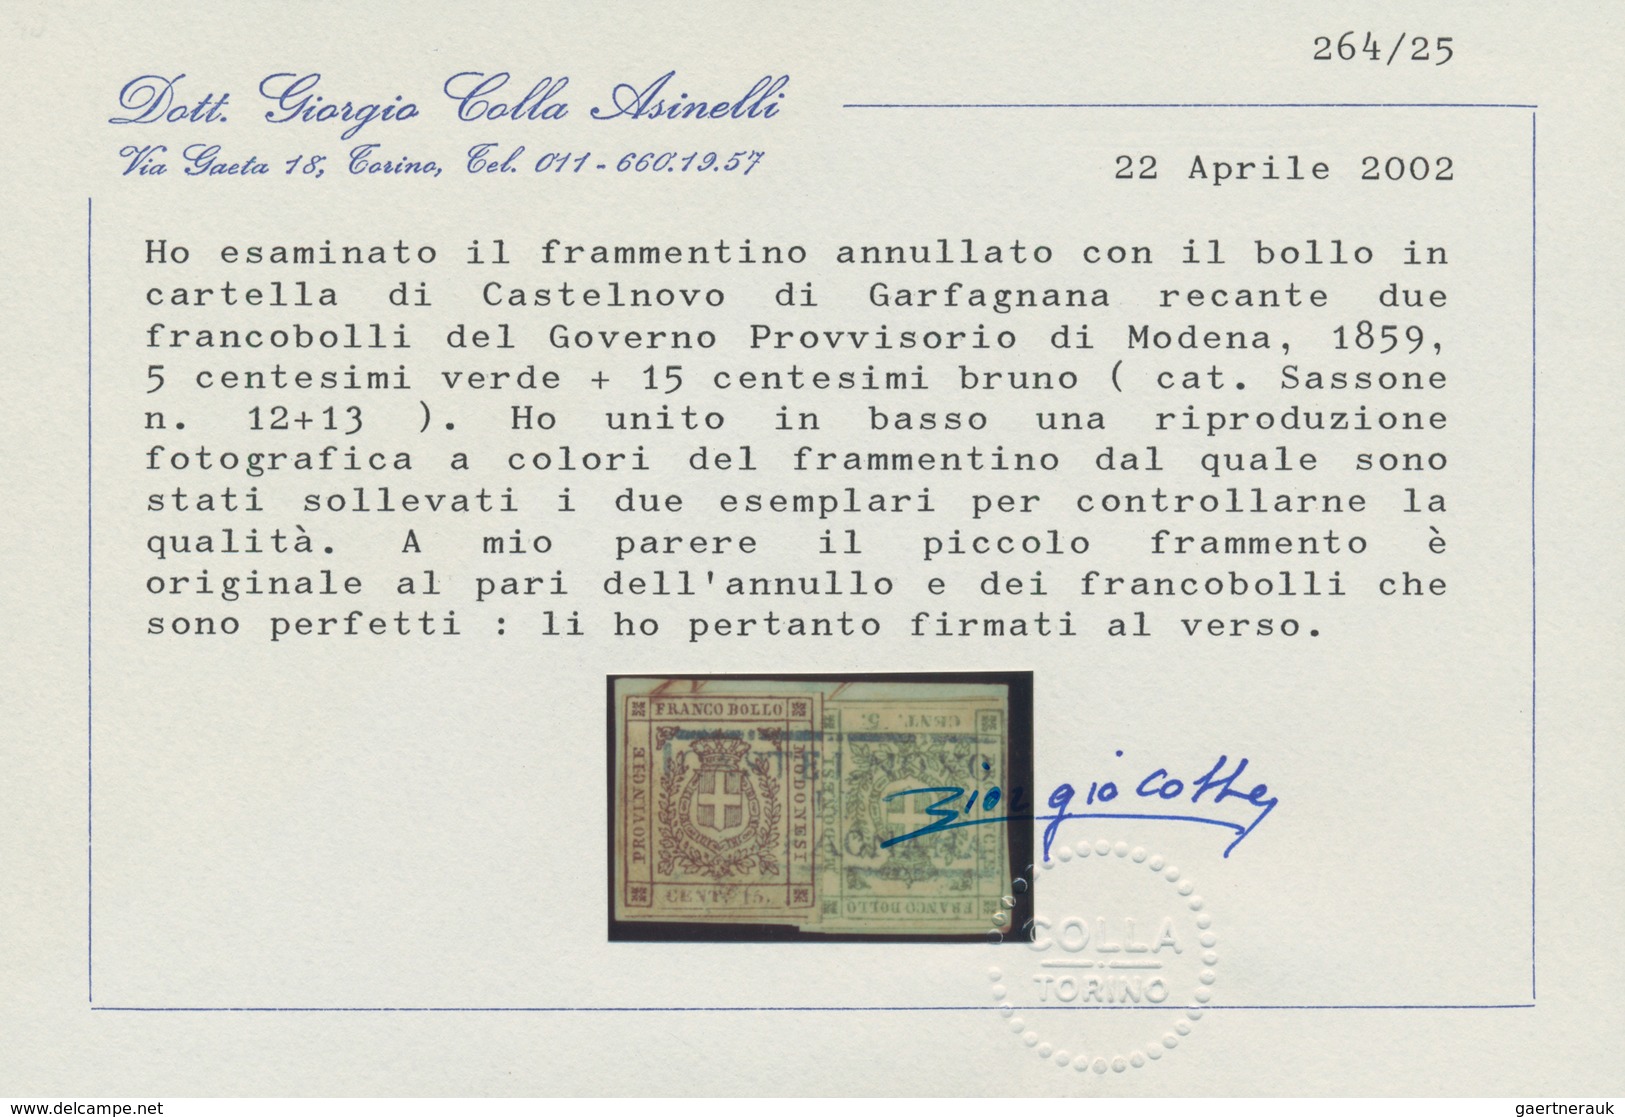 00737 Italien - Altitalienische Staaten: Modena: 1859: Provisional Government, 5 Cents And 15 Cents, Cance - Modène